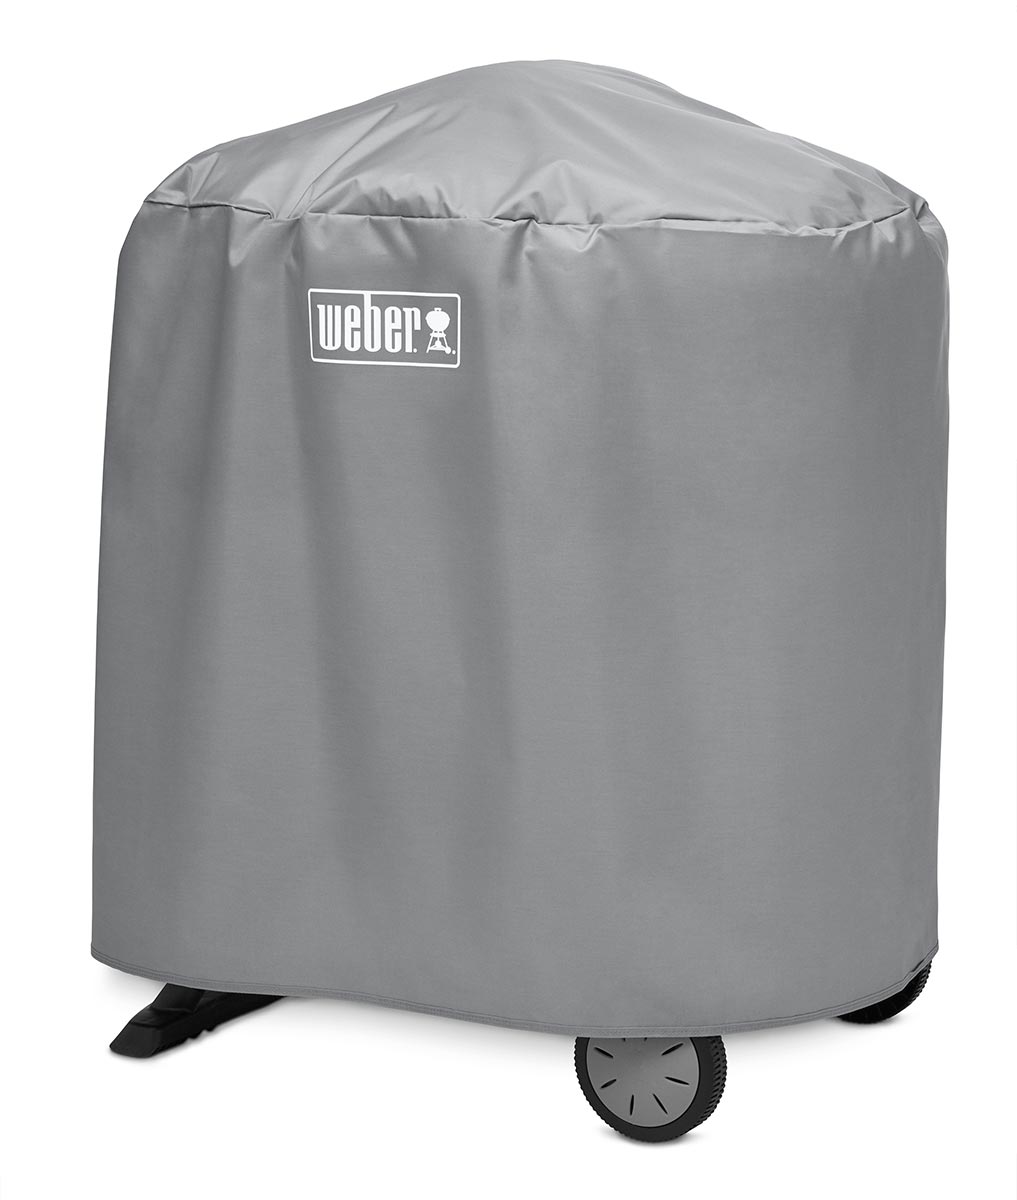 weber-barbecue-cover_7177.jpg